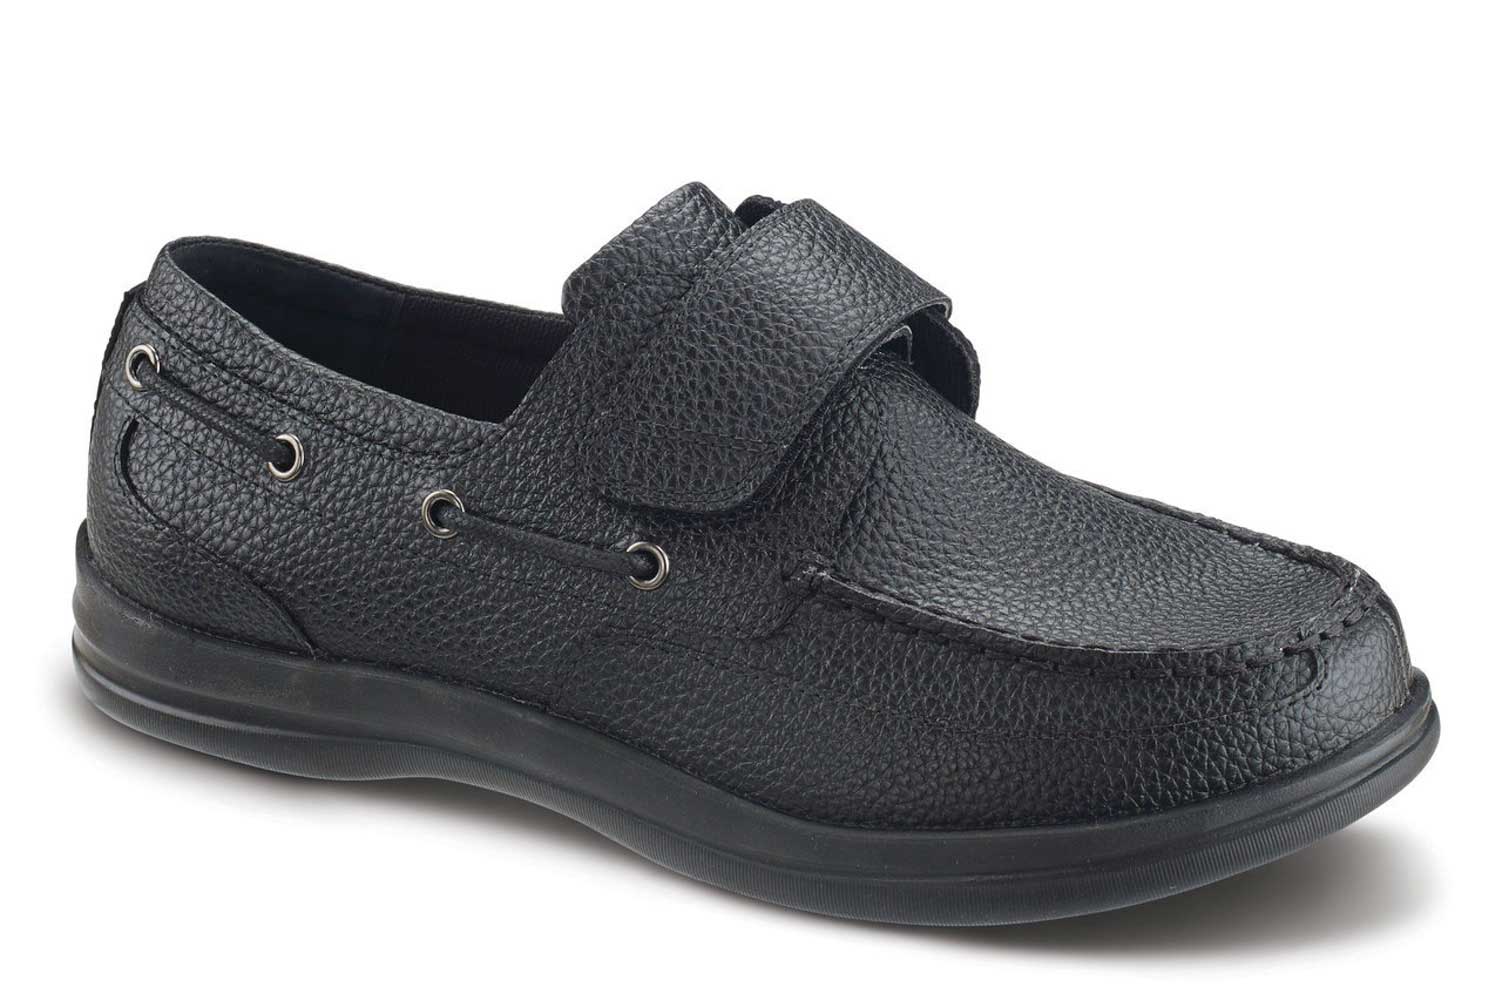 Apex Shoes A2000M Men's Boat Shoe - Comfort Orthopedic Diabetic Shoe - Extra Depth For Orthotics - Extra Wide